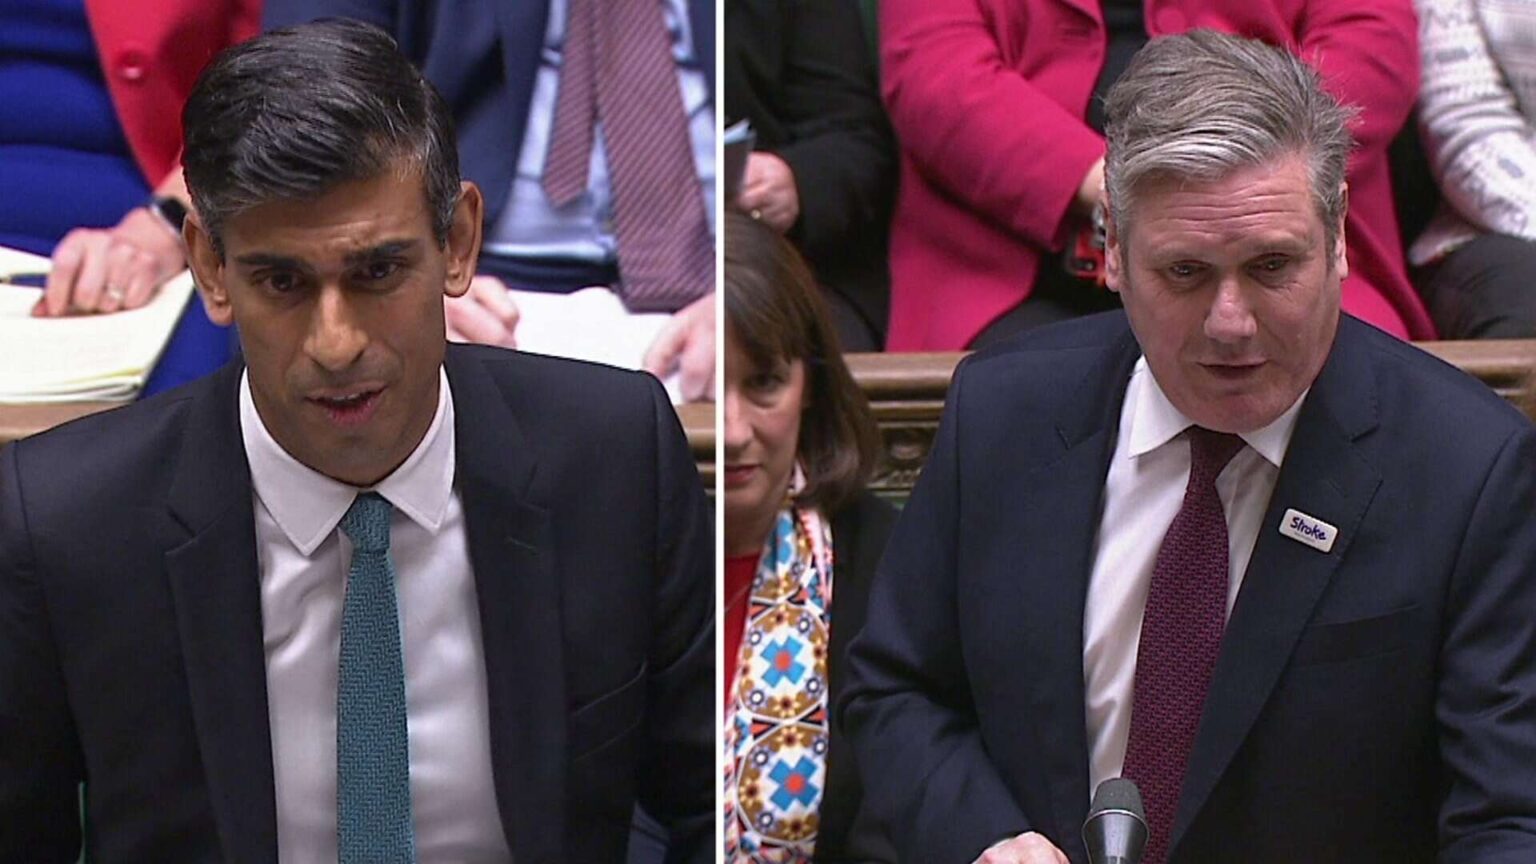 PMQs – Does the PM accept the Casey review in full?